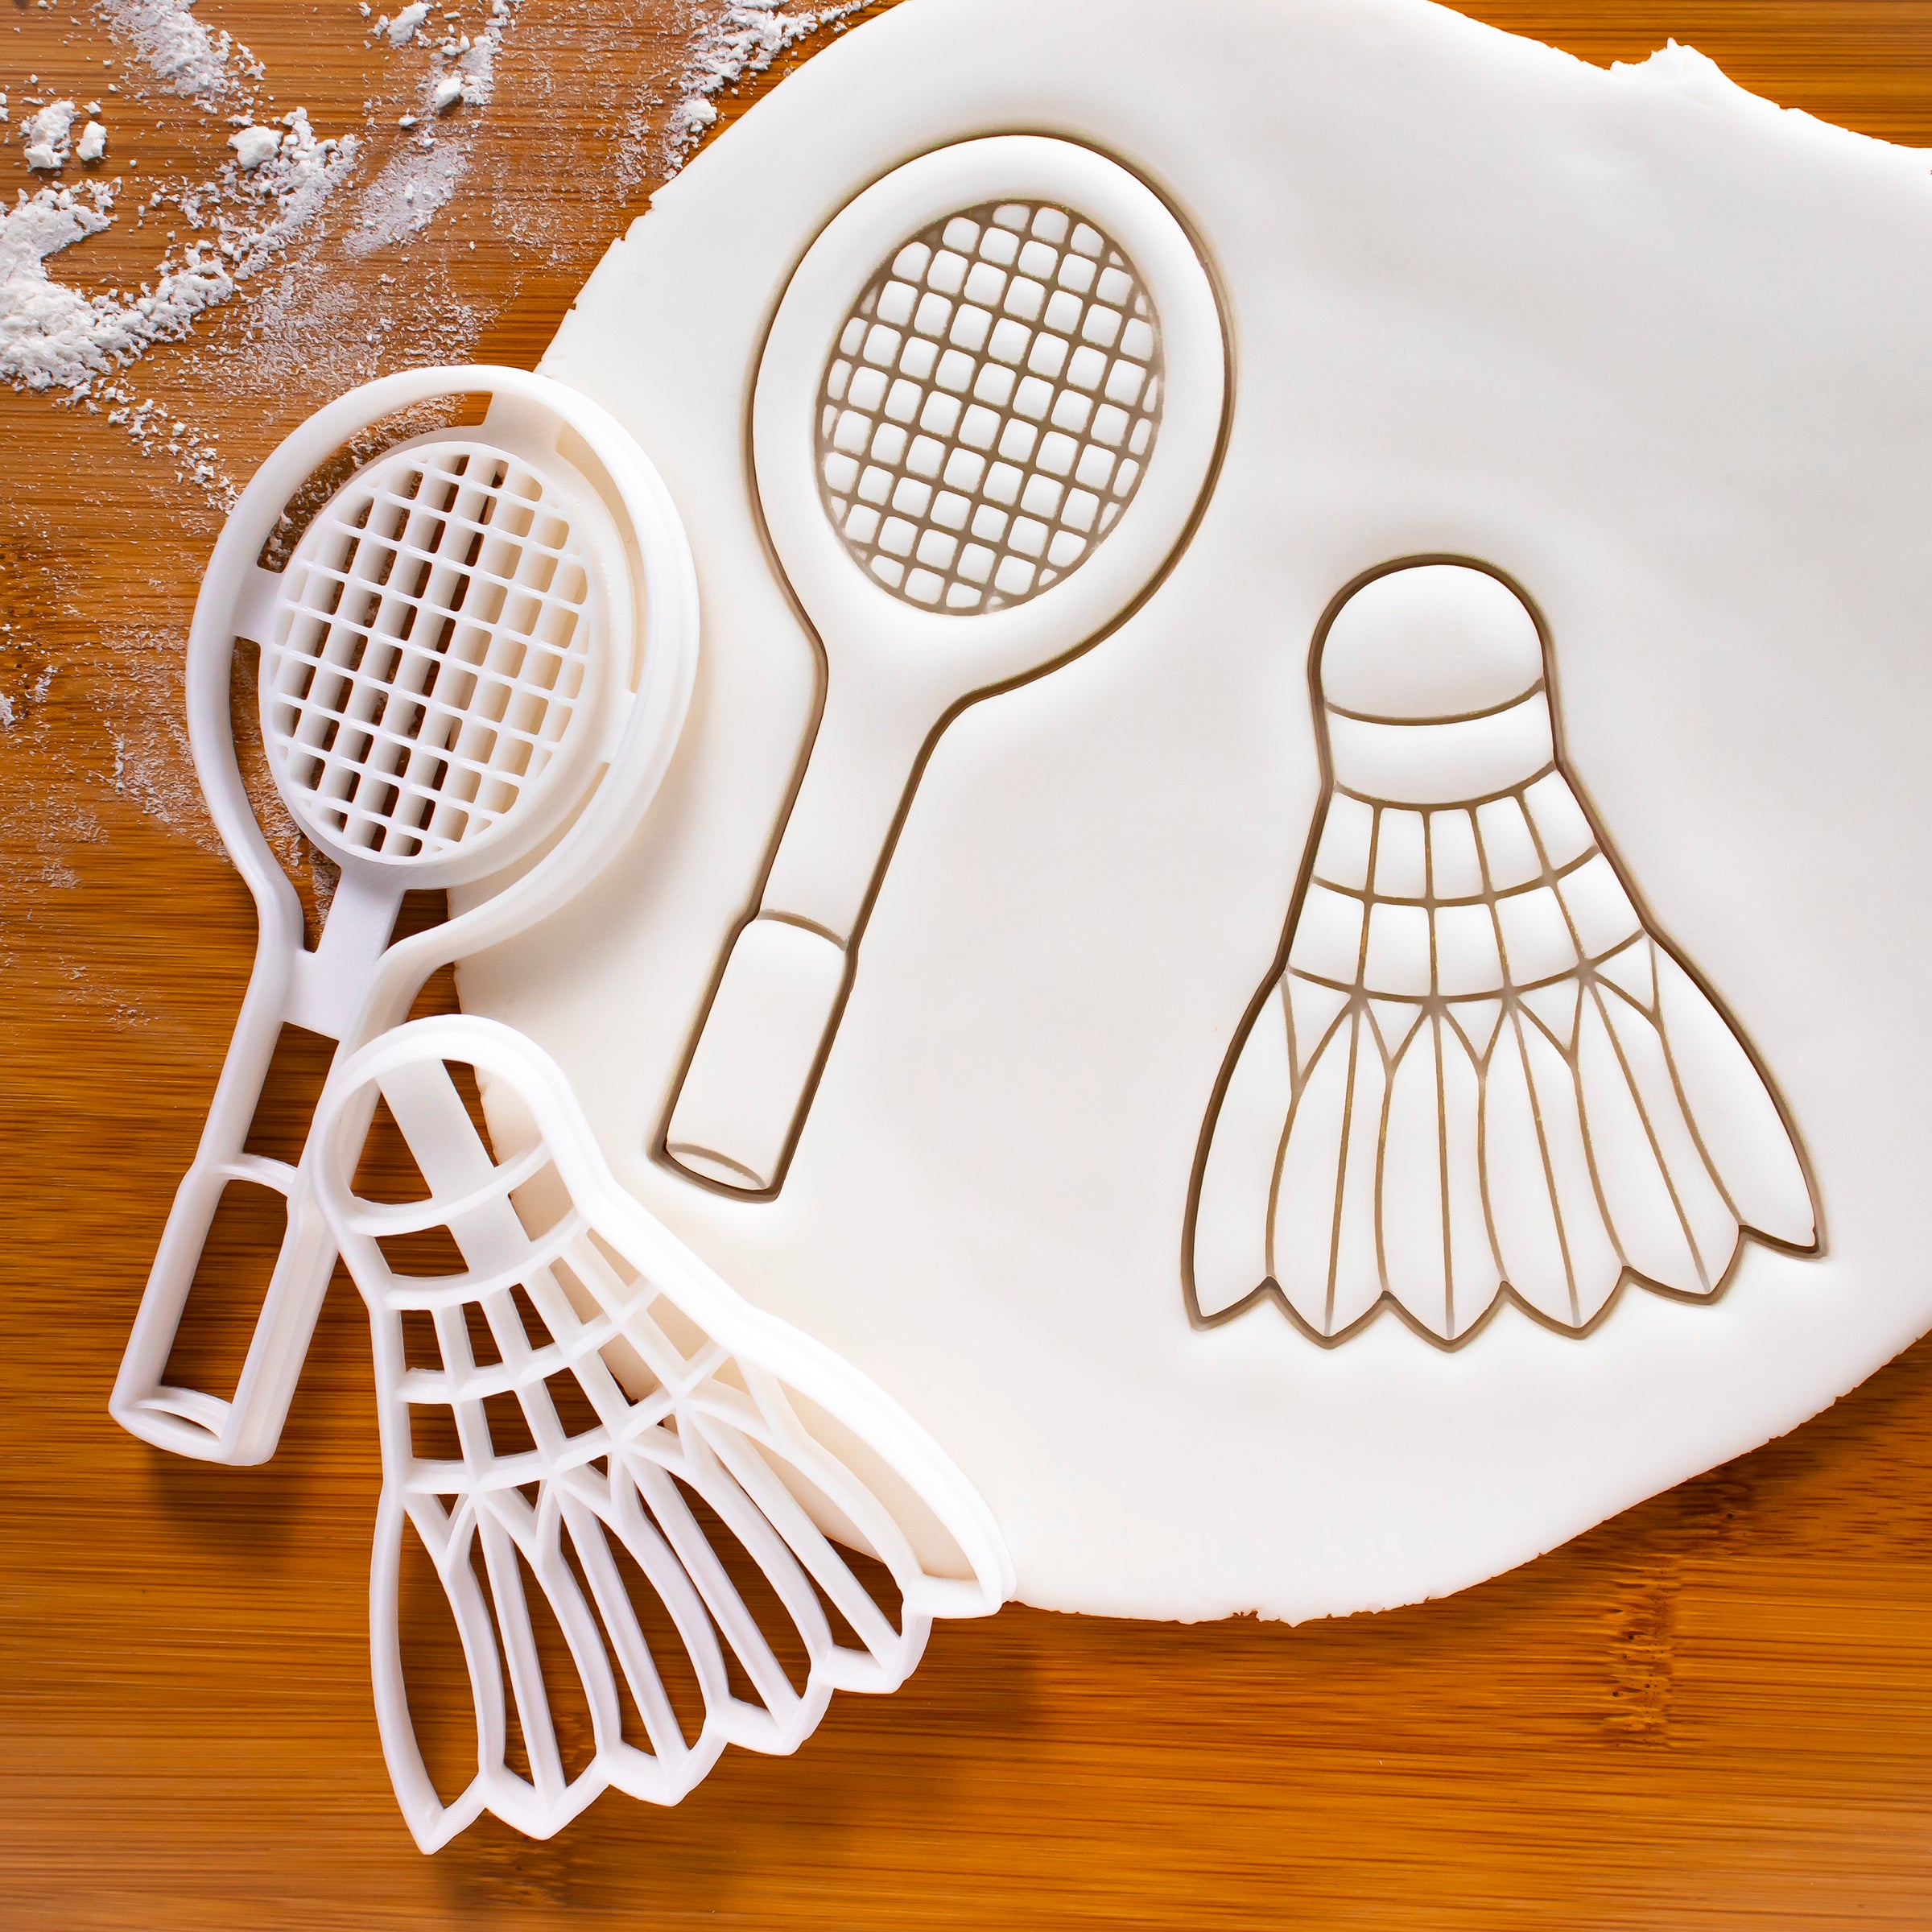 Set of 2 Badminton Racket and Shuttlecock Cookie Cutters